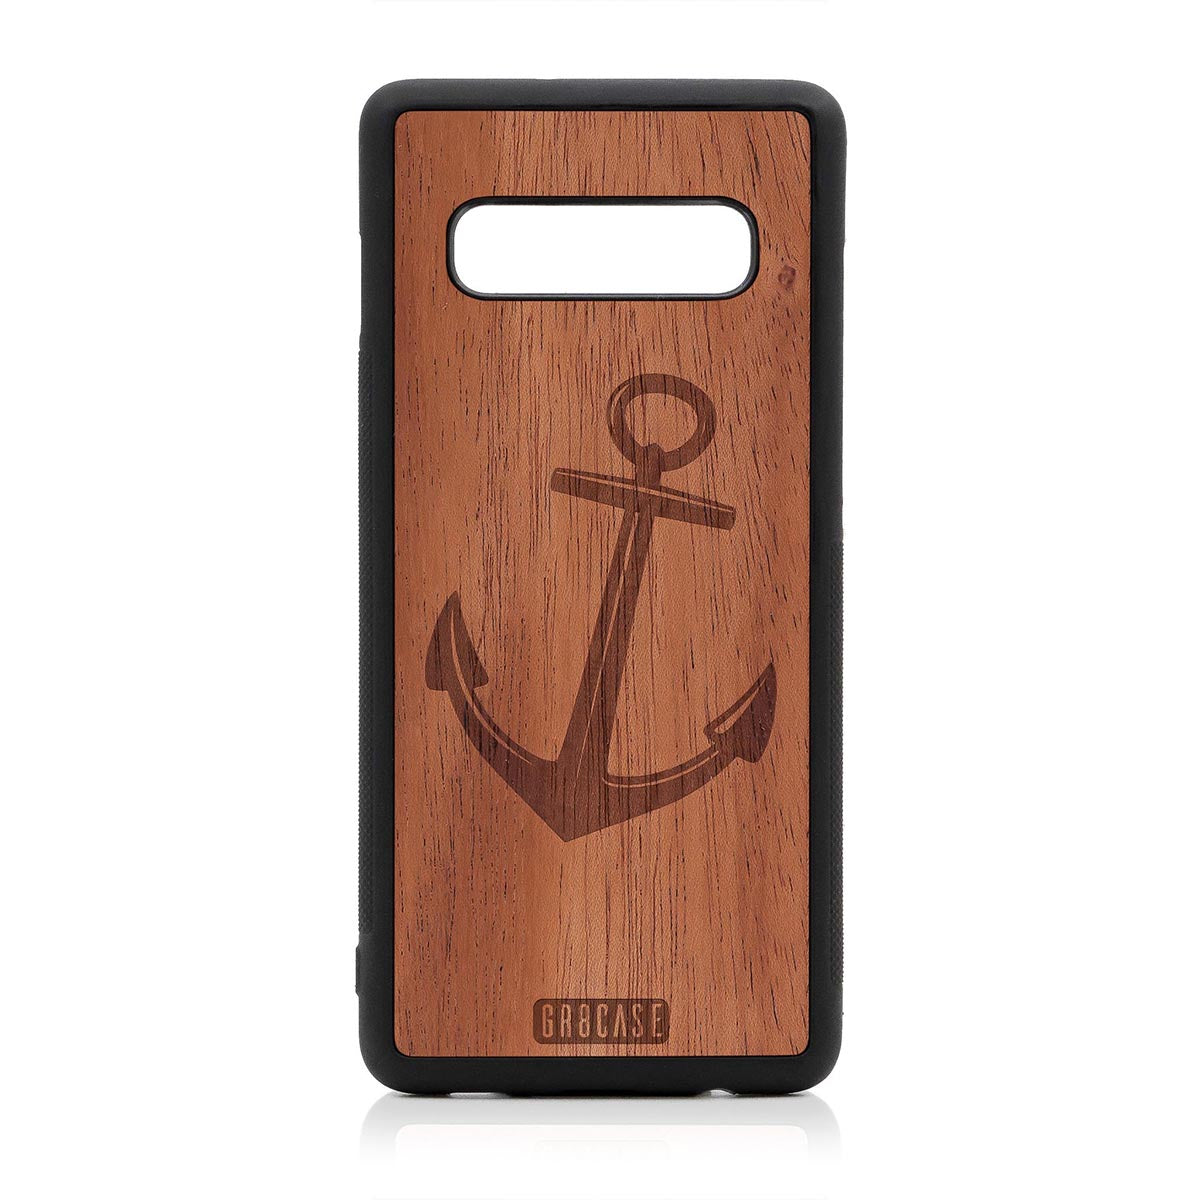 Anchor Design Wood Case For Samsung Galaxy S10 Plus by GR8CASE